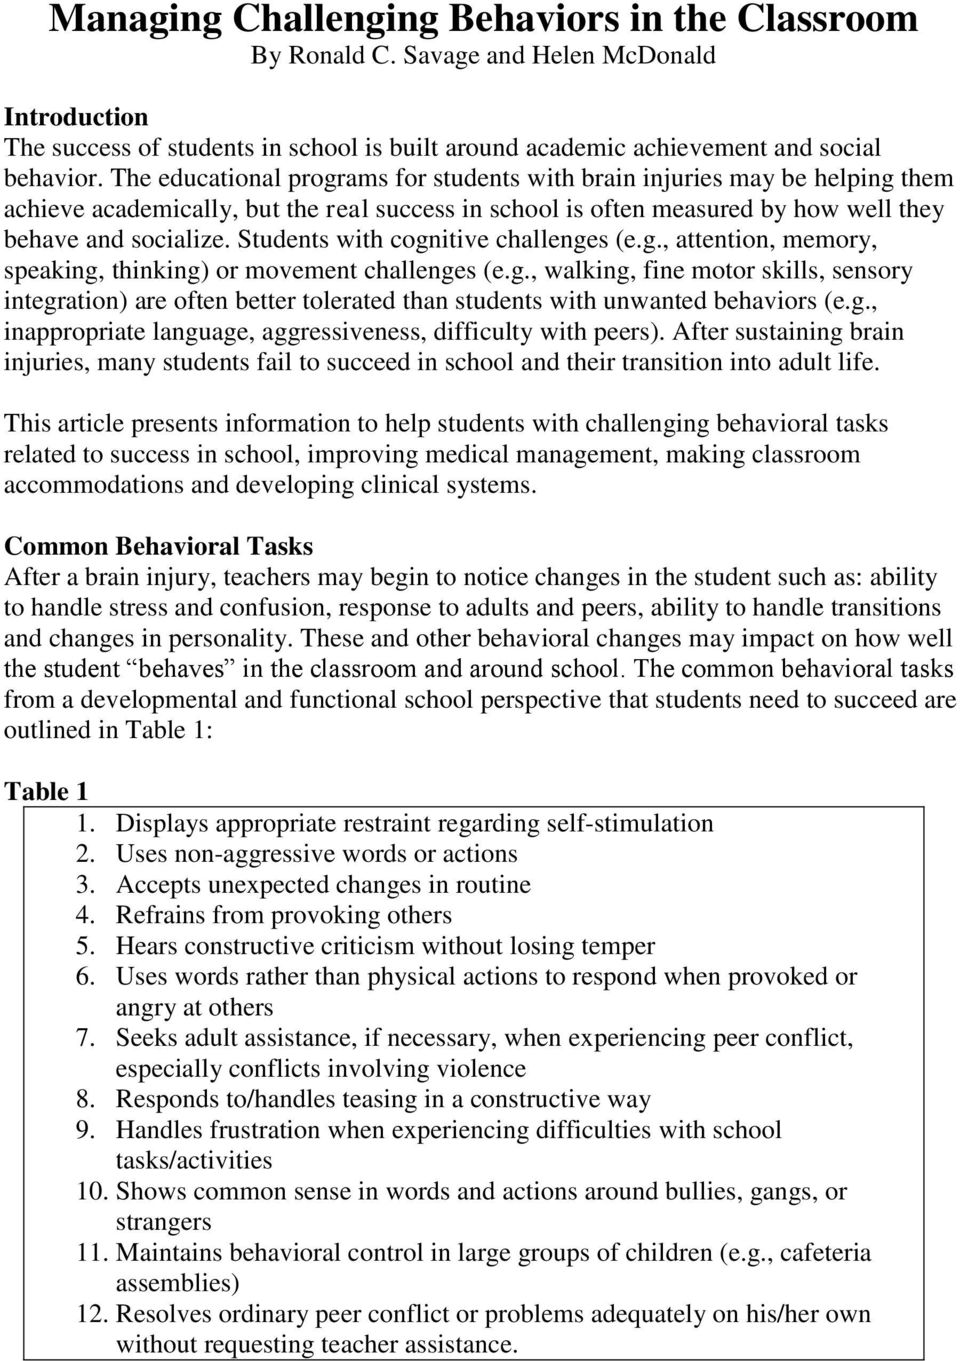 Students with cognitive challenges (e.g., attention, memory, speaking, thinking) or movement challenges (e.g., walking, fine motor skills, sensory integration) are often better tolerated than students with unwanted behaviors (e.